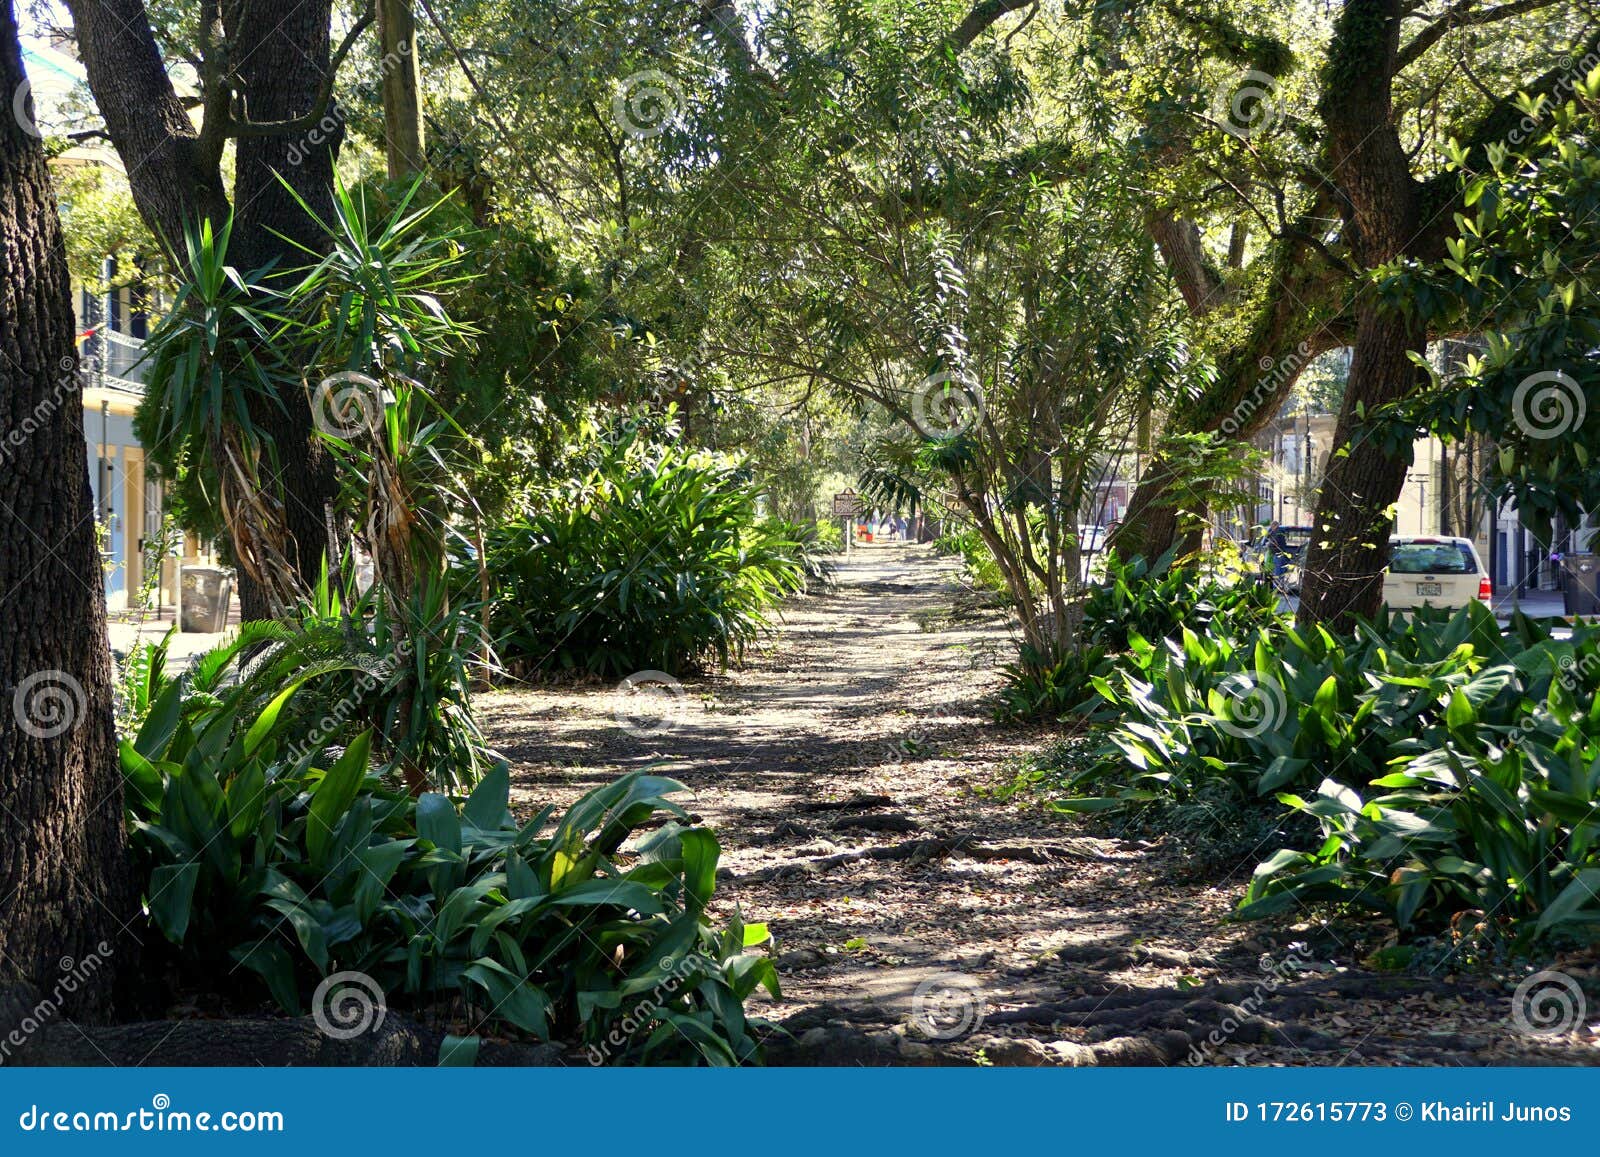 New Orleans, Louisiana, U.S.A - February 7, 2020 - The Path On The Green Tropical Garden By ...